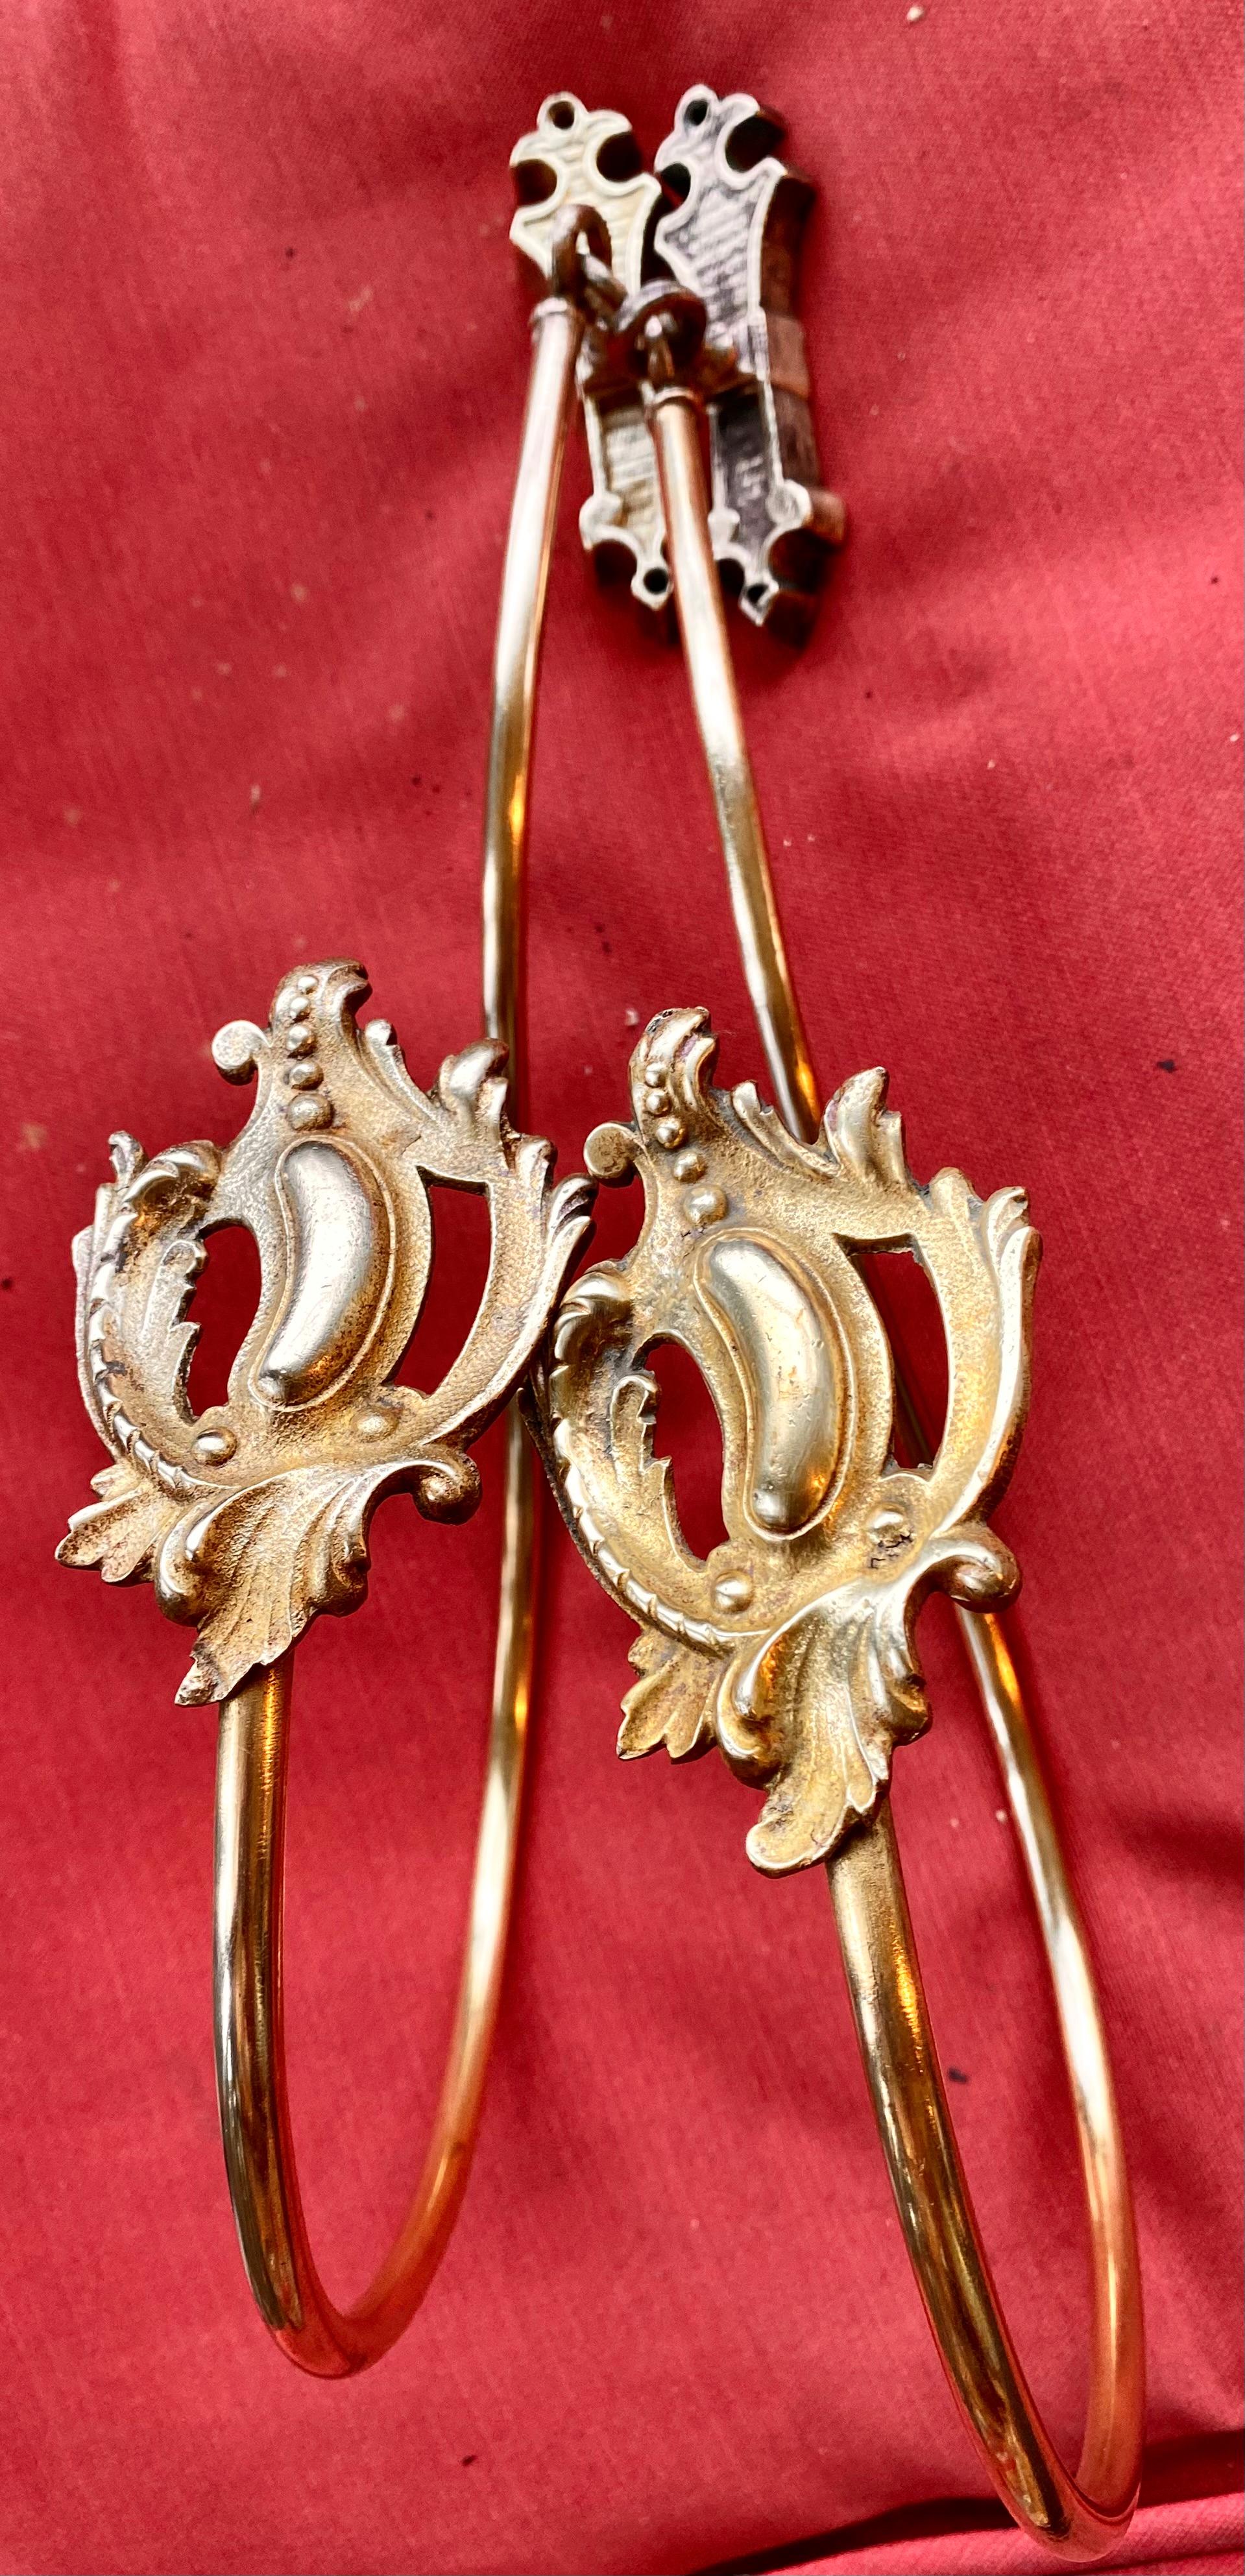 Late 19th Century Pair of French Antique Gilt Bronze Curtain Tie-Backs With Maker's Mark. For Sale